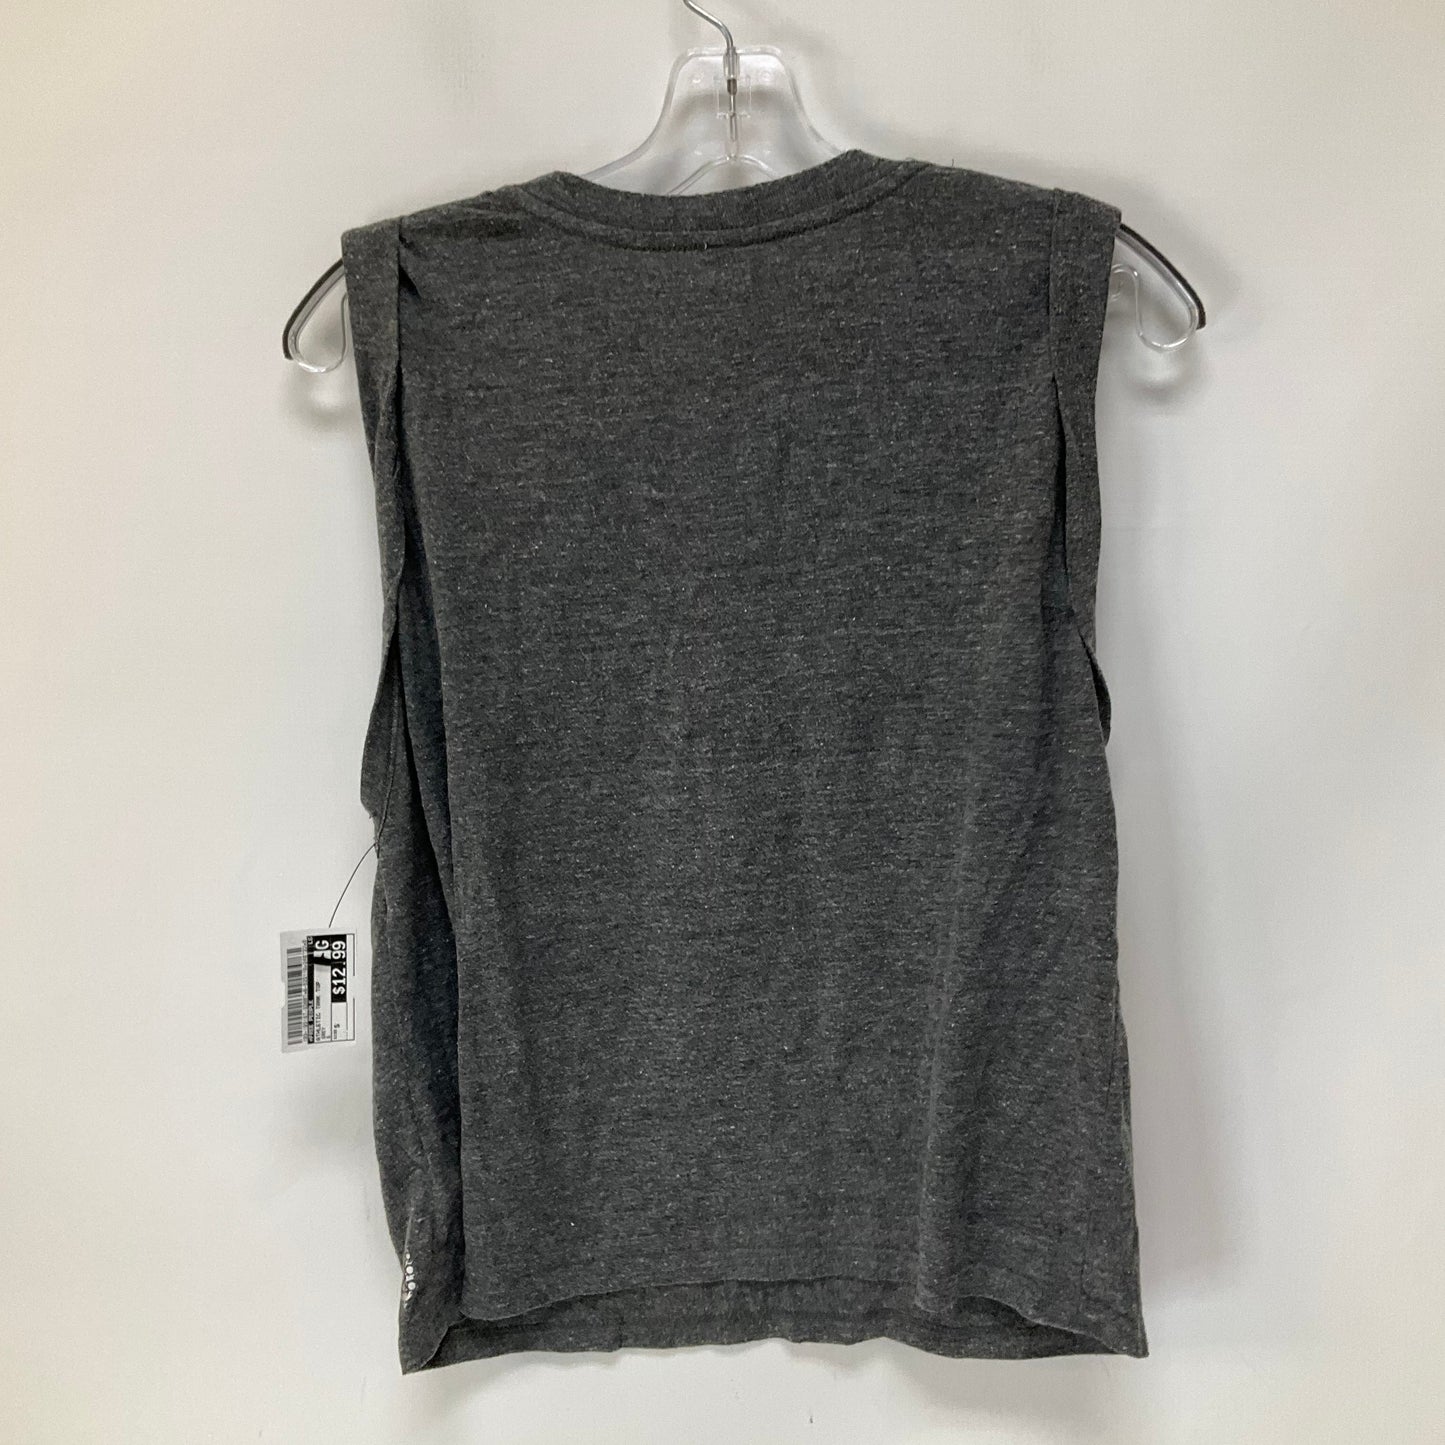 Grey Athletic Tank Top Free People, Size S